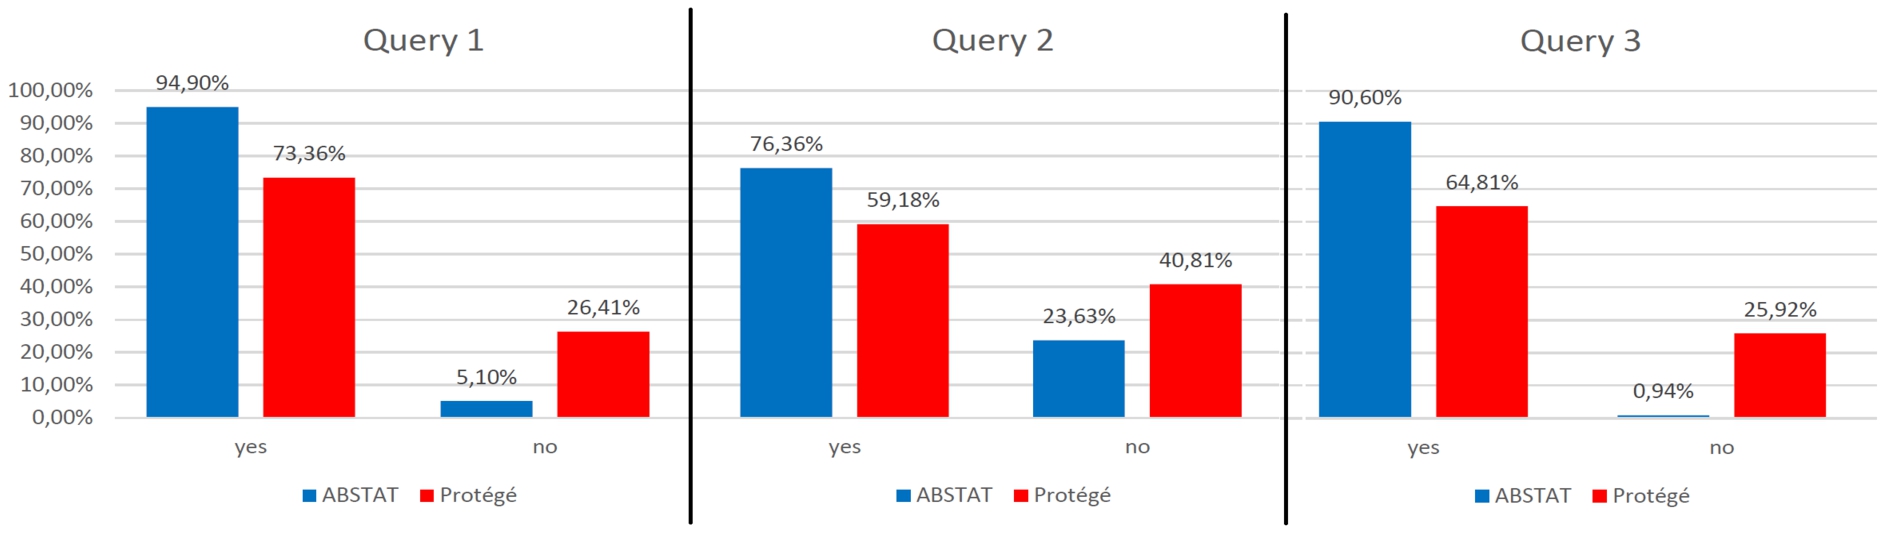 Distribution of users who used only ABSTAT or Protégé to answer each query.